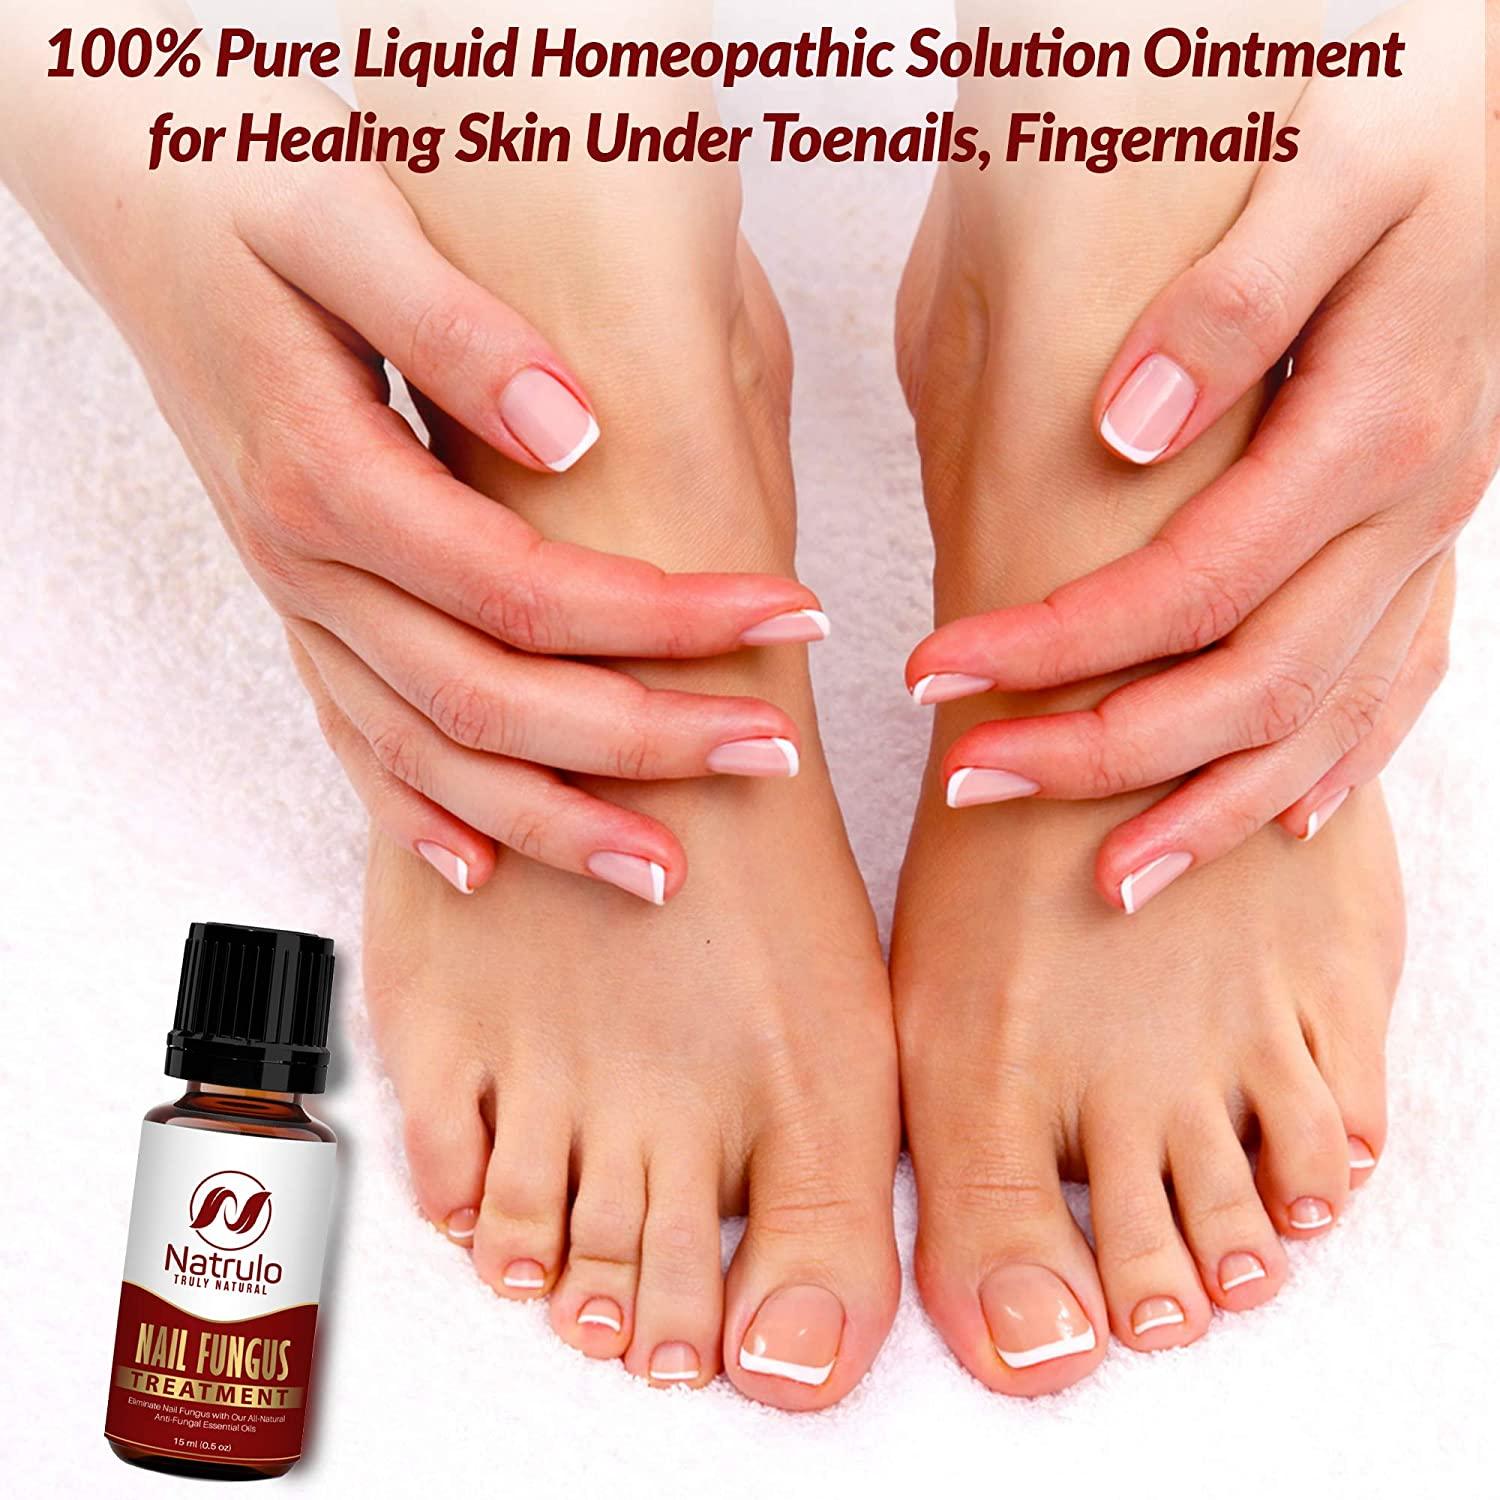 Buy Thejus Nail Cure Oil,10ML Online at Low Prices in India - Amazon.in